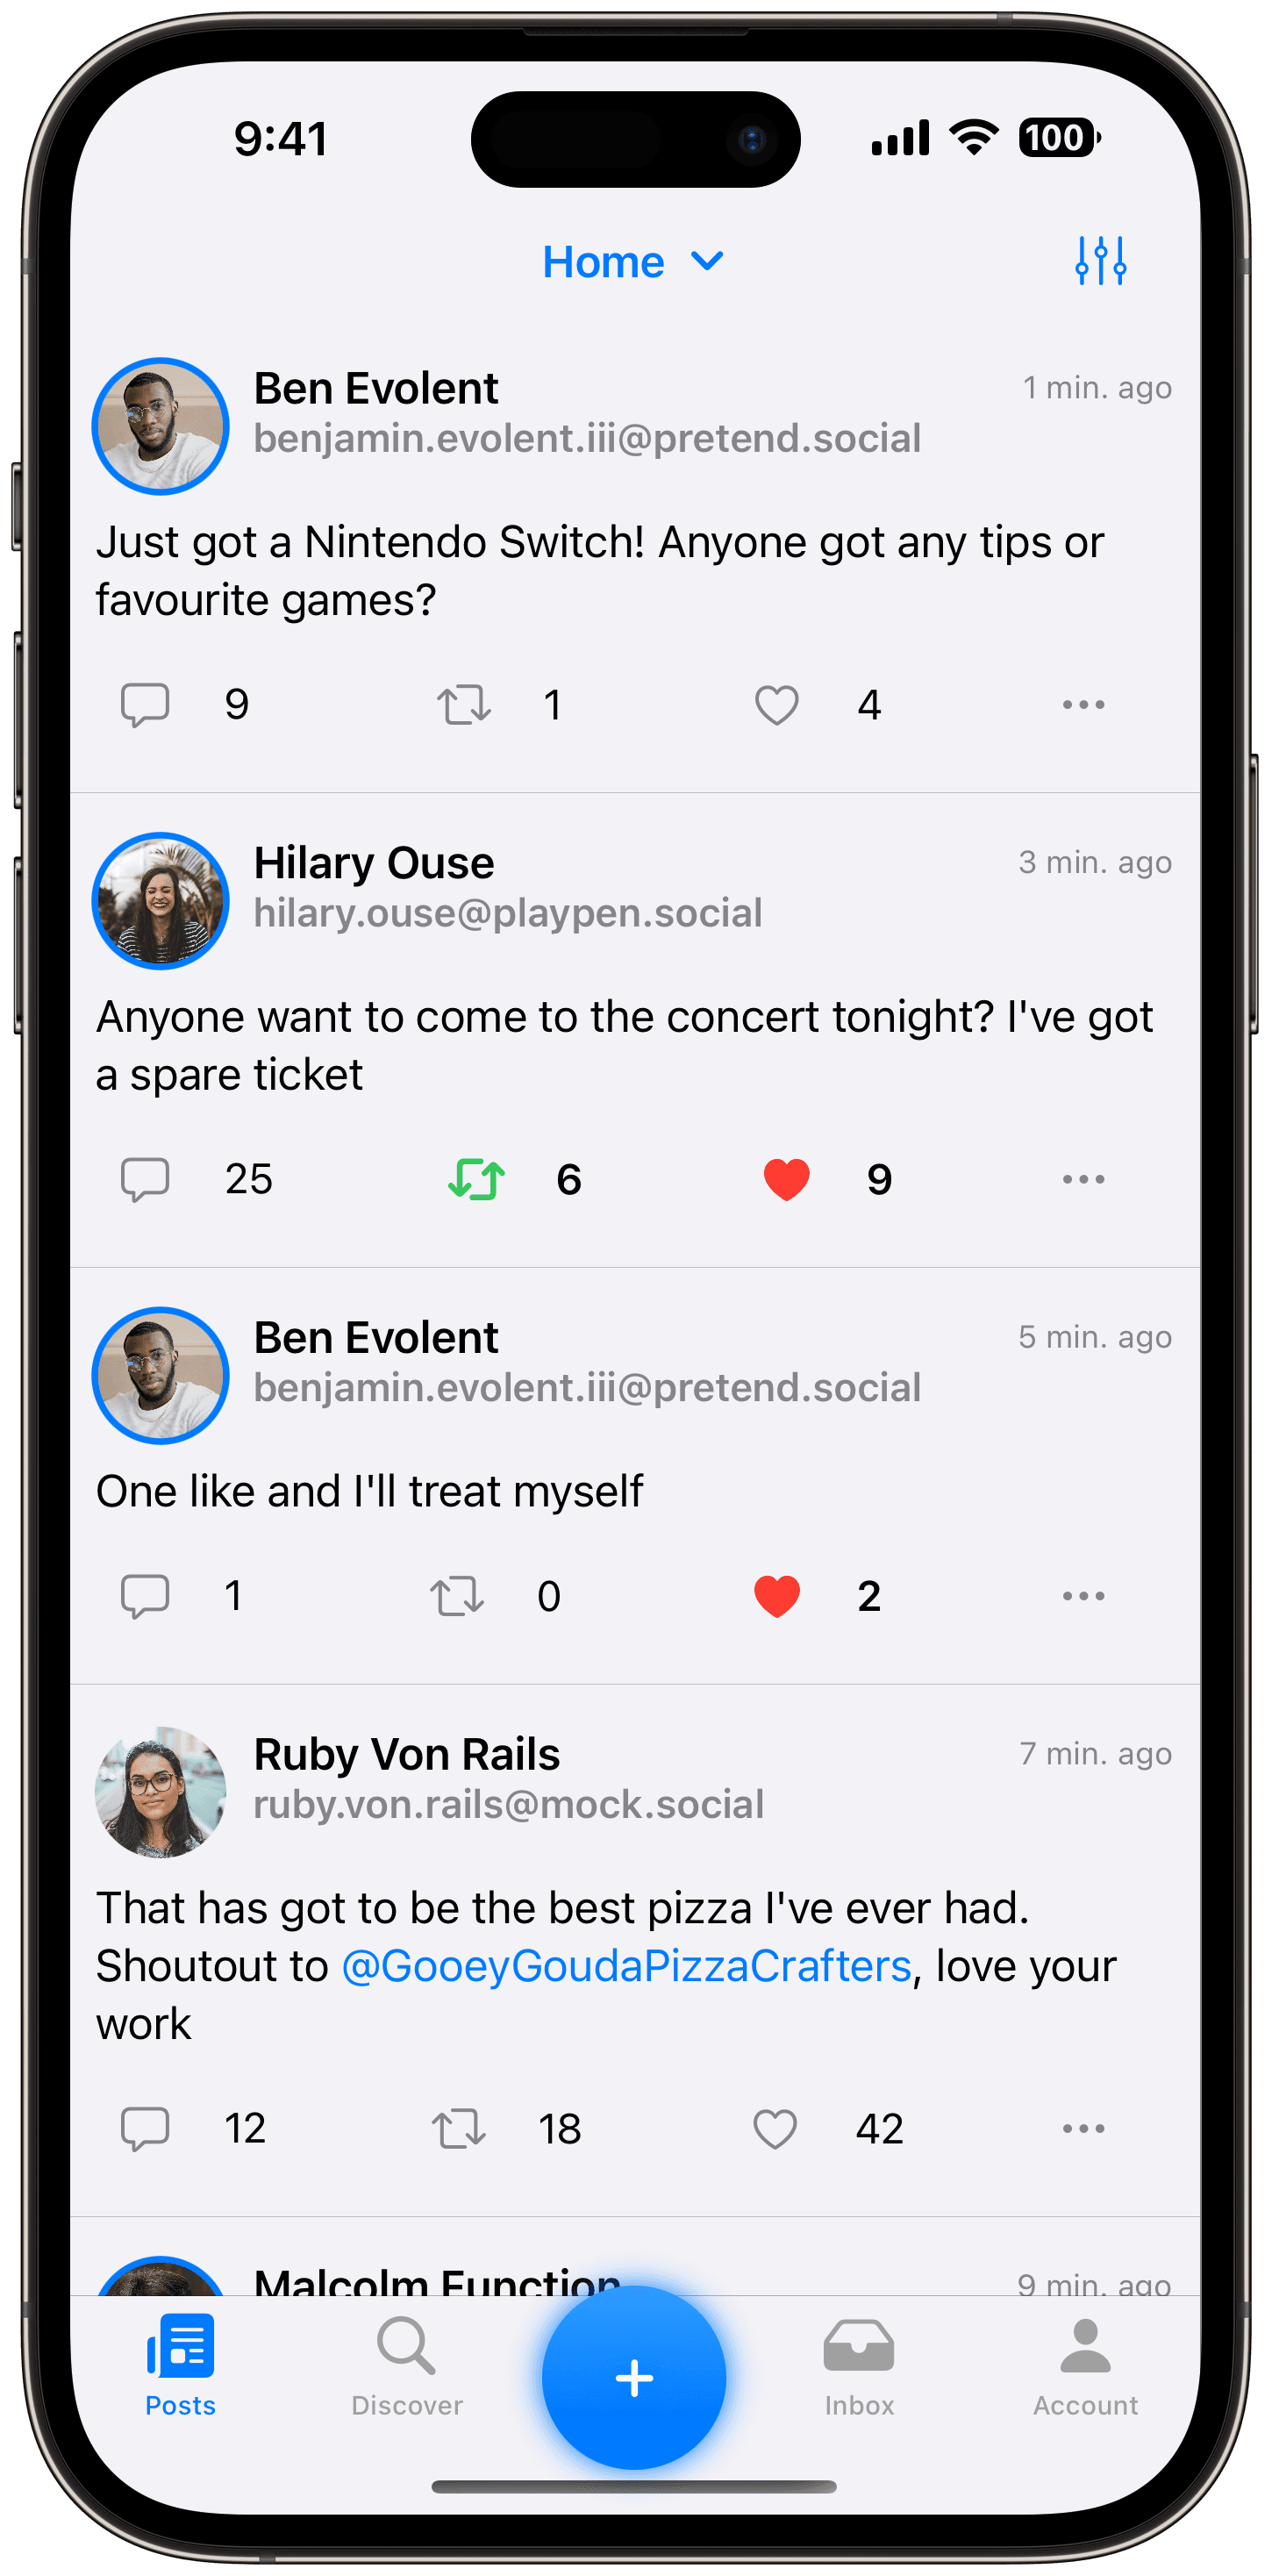 Home screen showing users statuses